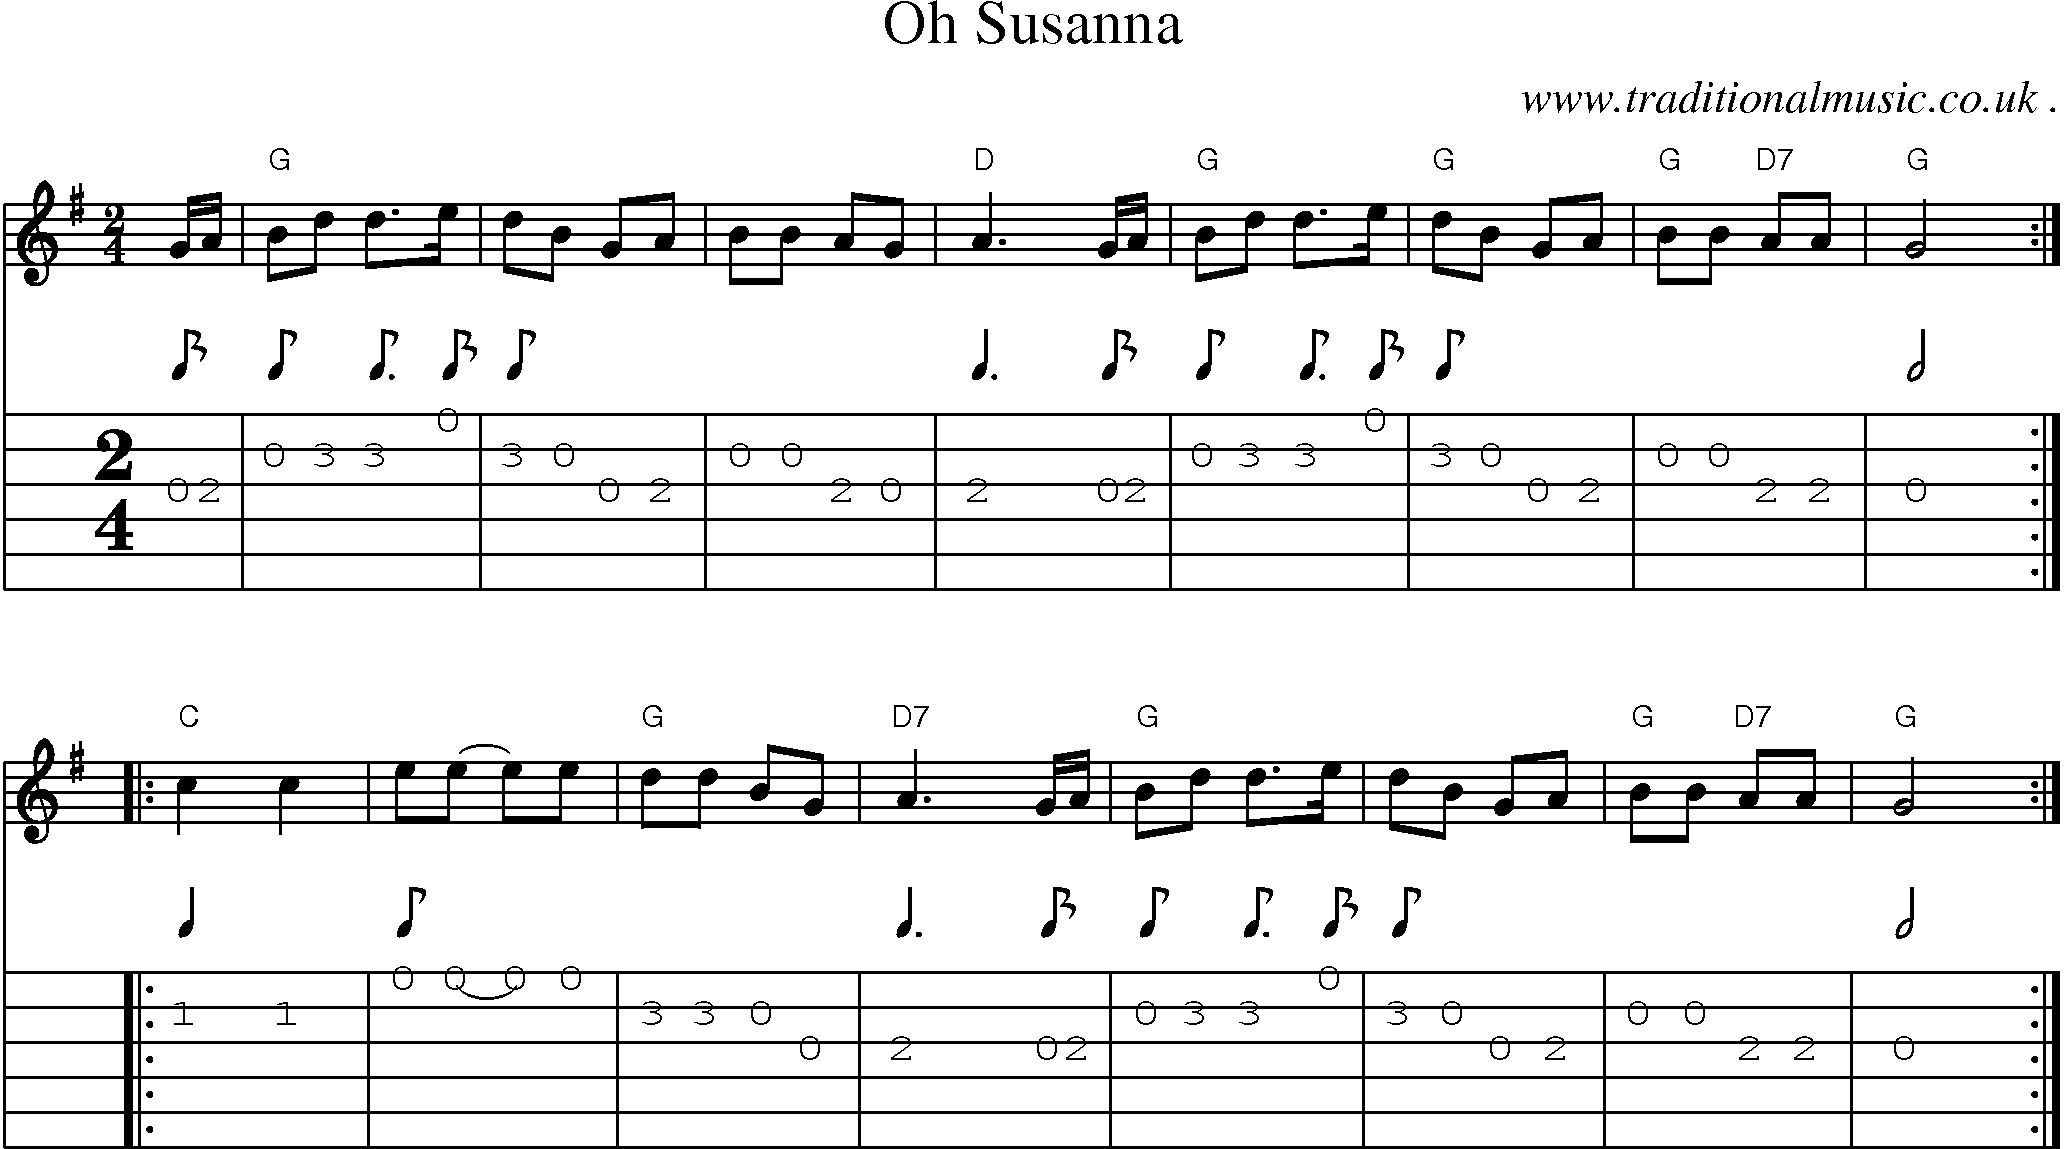 Music Score and Guitar Tabs for Oh Susanna